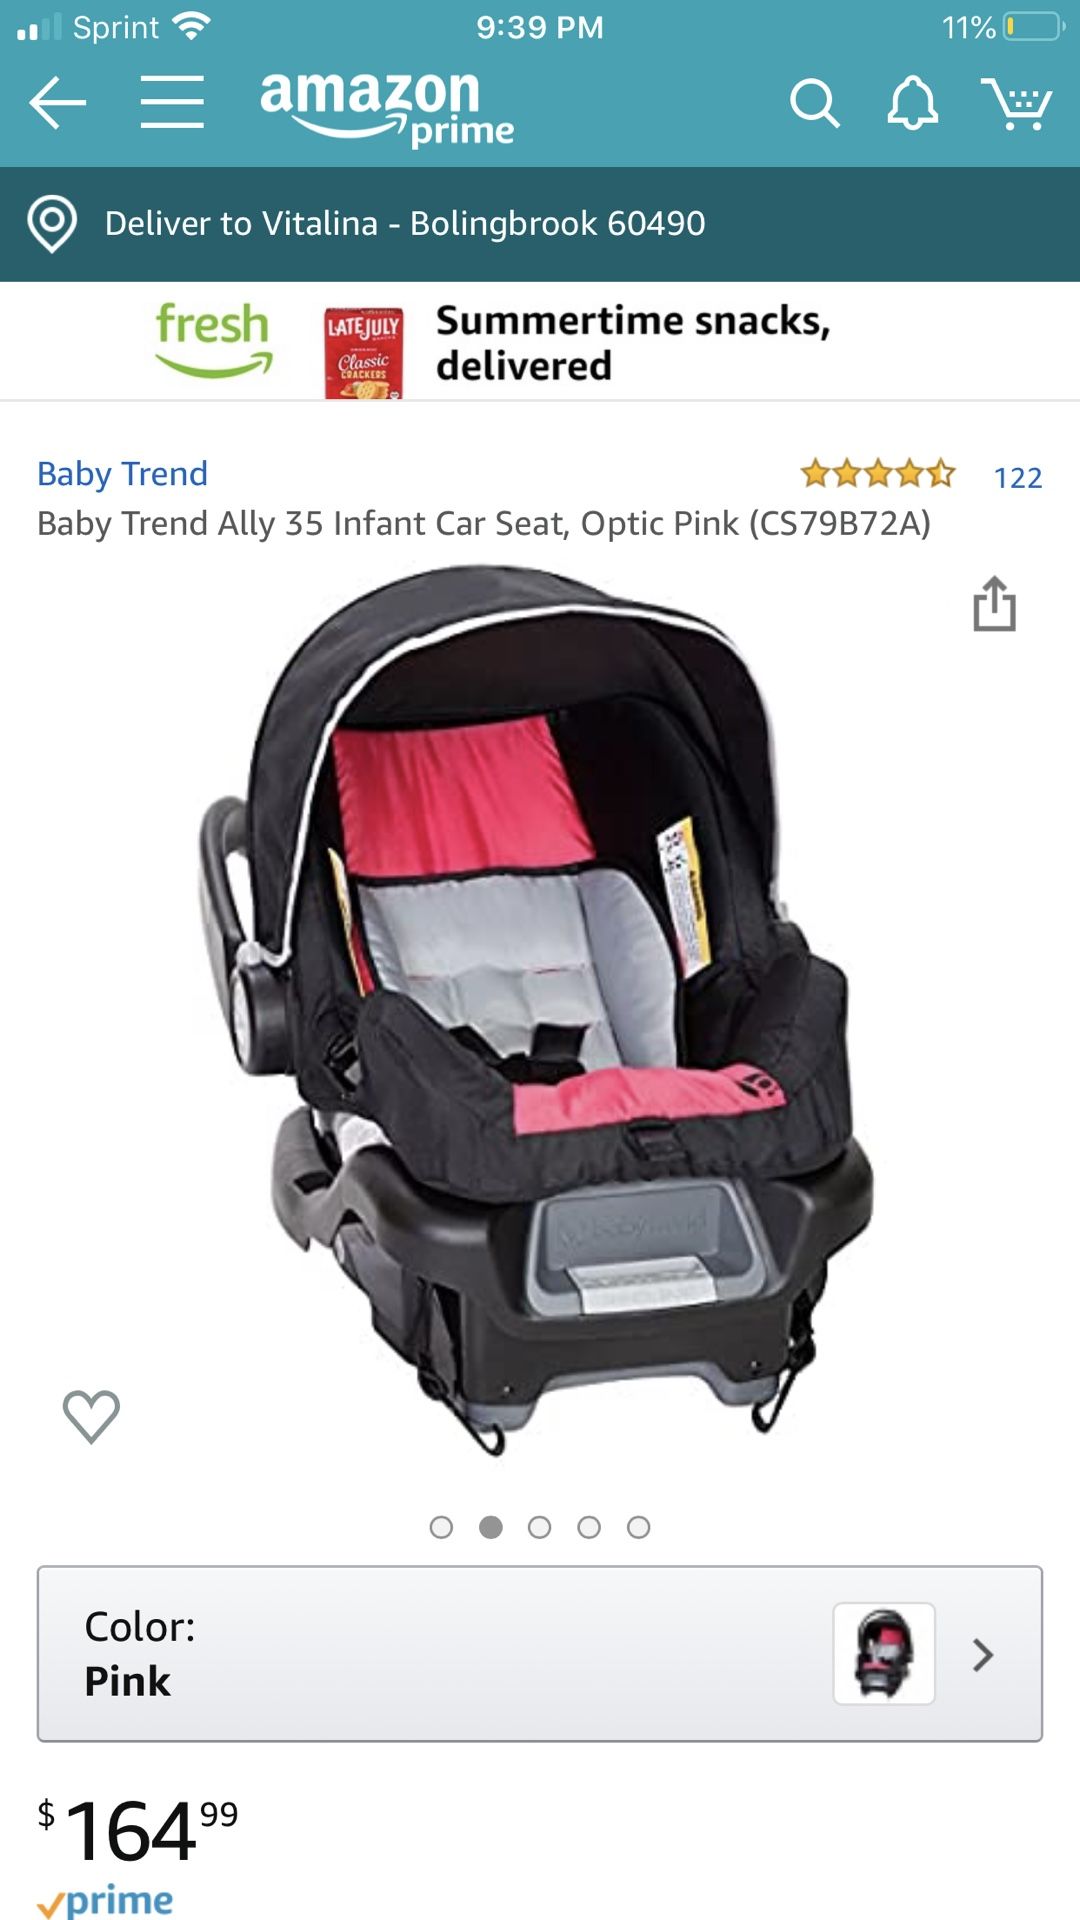 Baby Trend Ally 35 Infant Car Seat, Optic Pink (CS79B72A